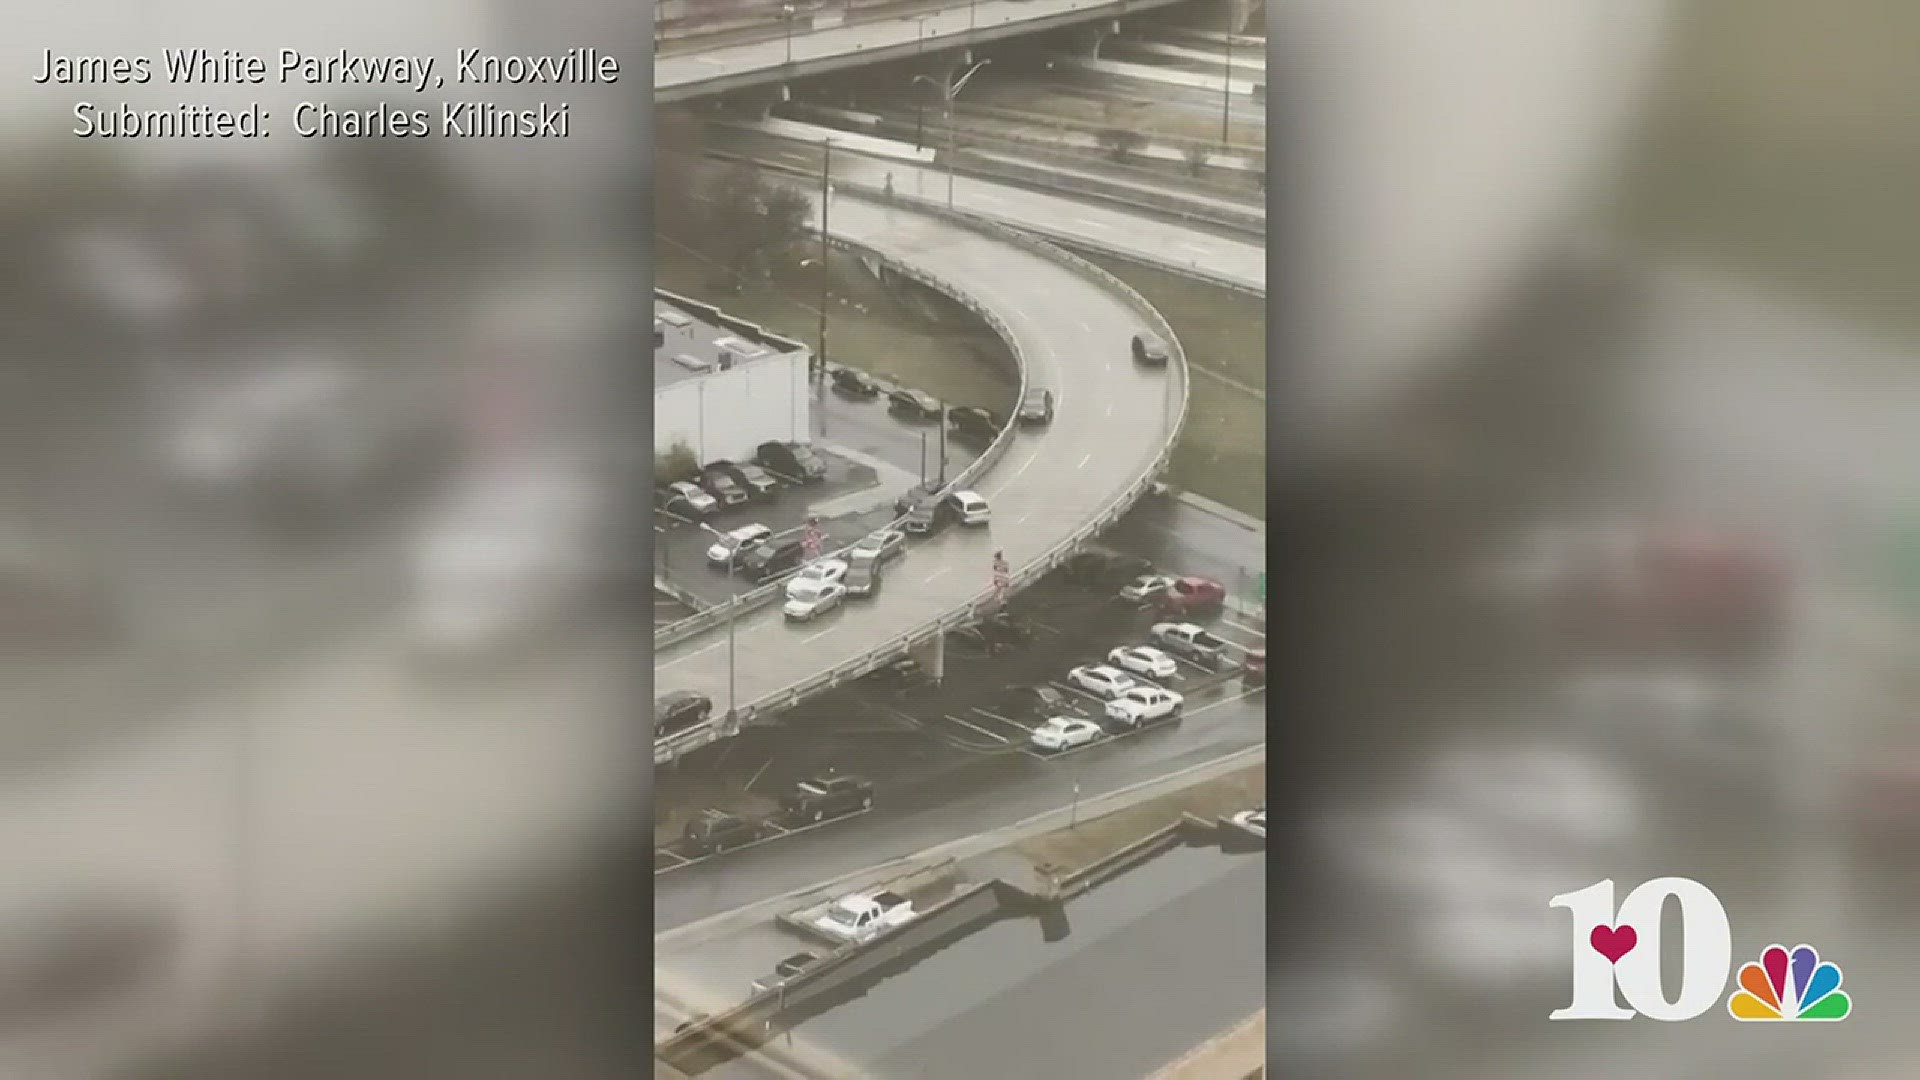 The James White Parkway ramp was a real, icy mess in downtown Knoxville Monday morning